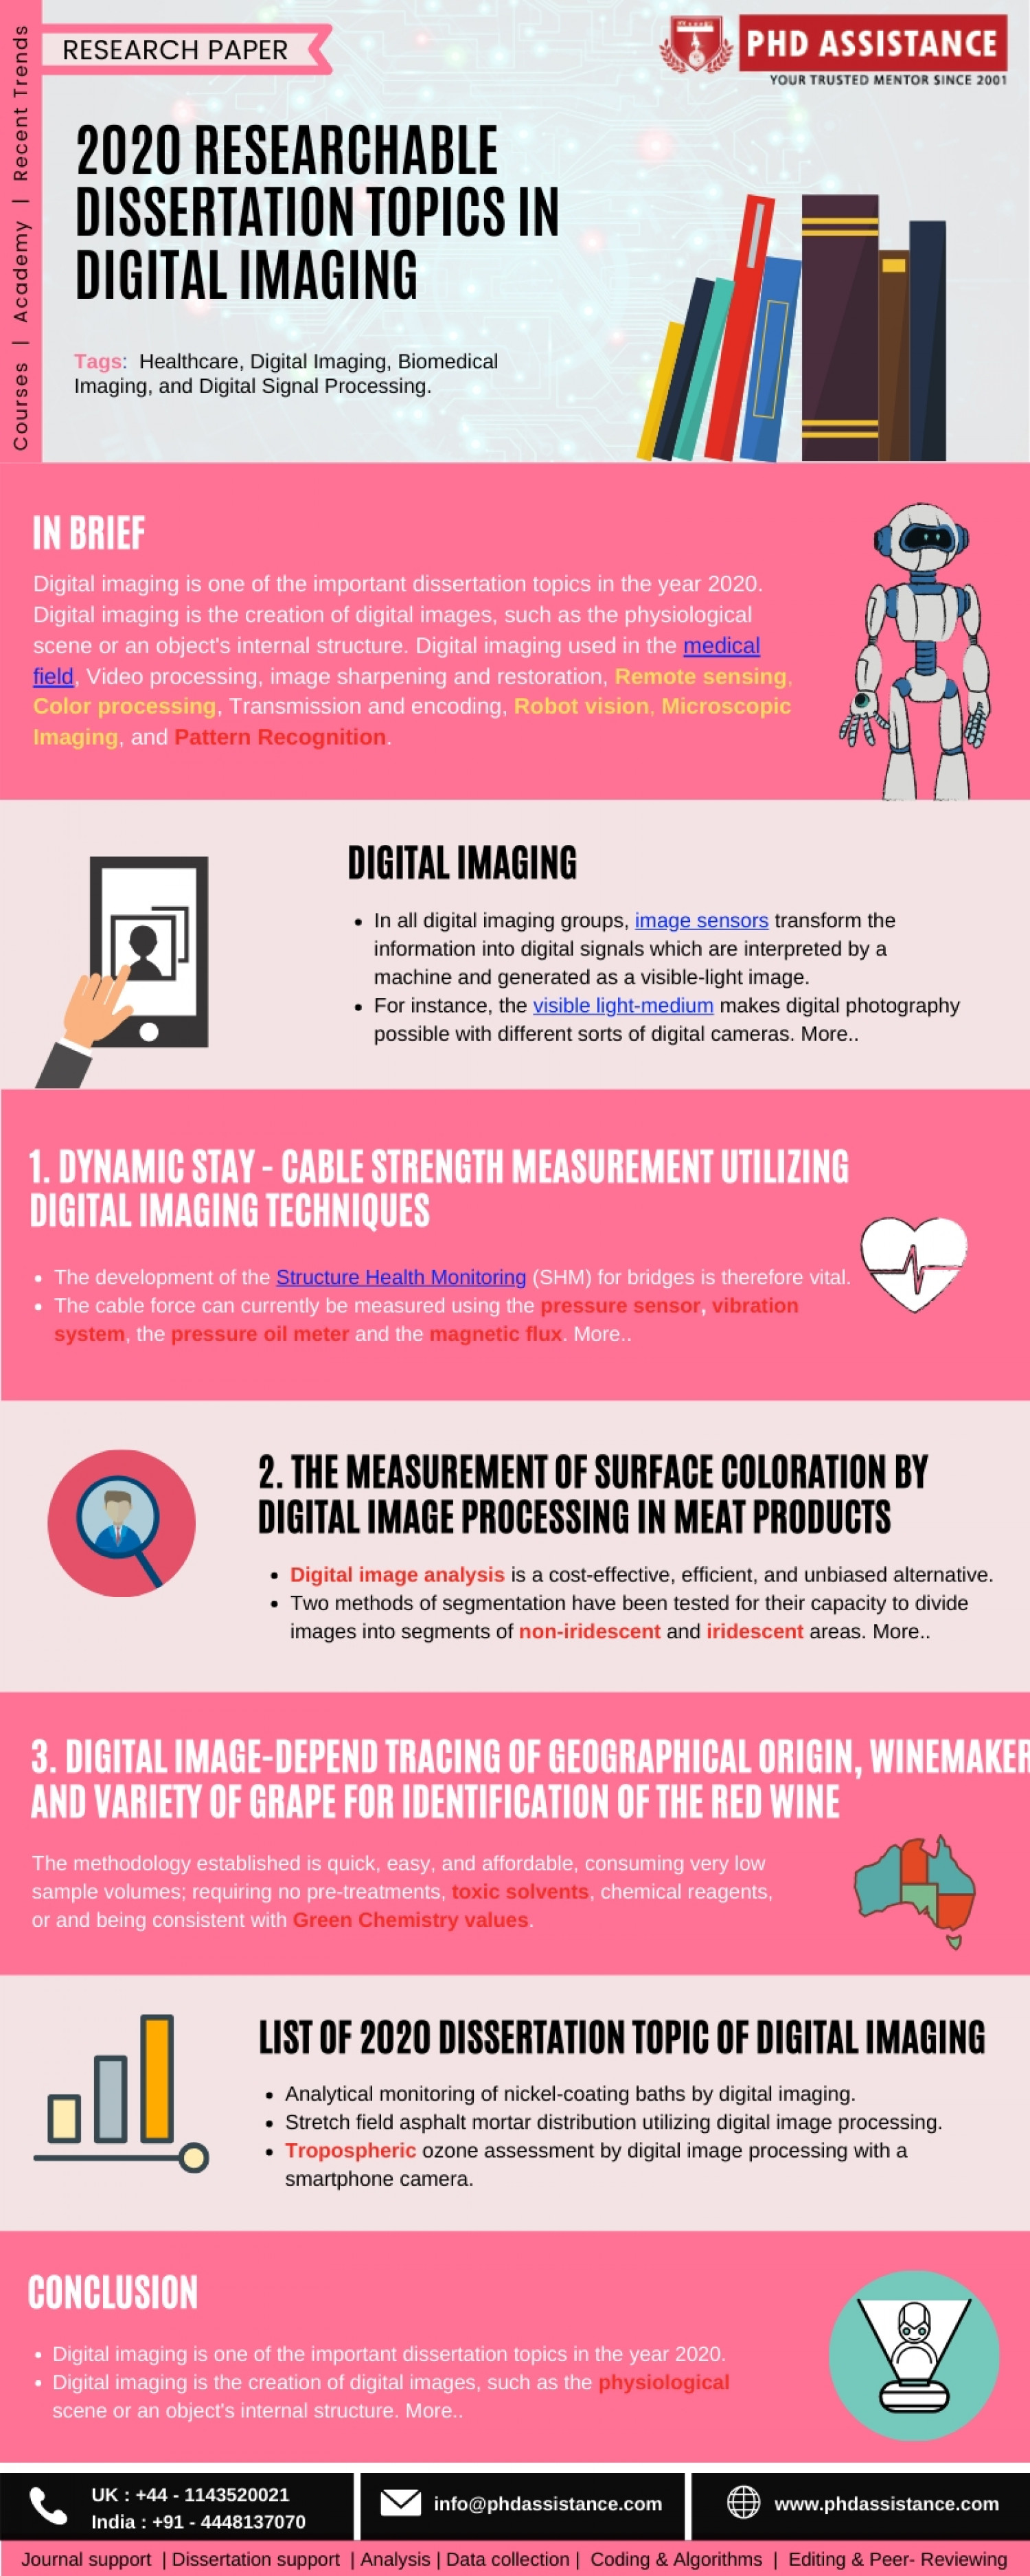 2020 Researchable Dissertation Topics In Digital Imaging - Phdassistance.com Infographic